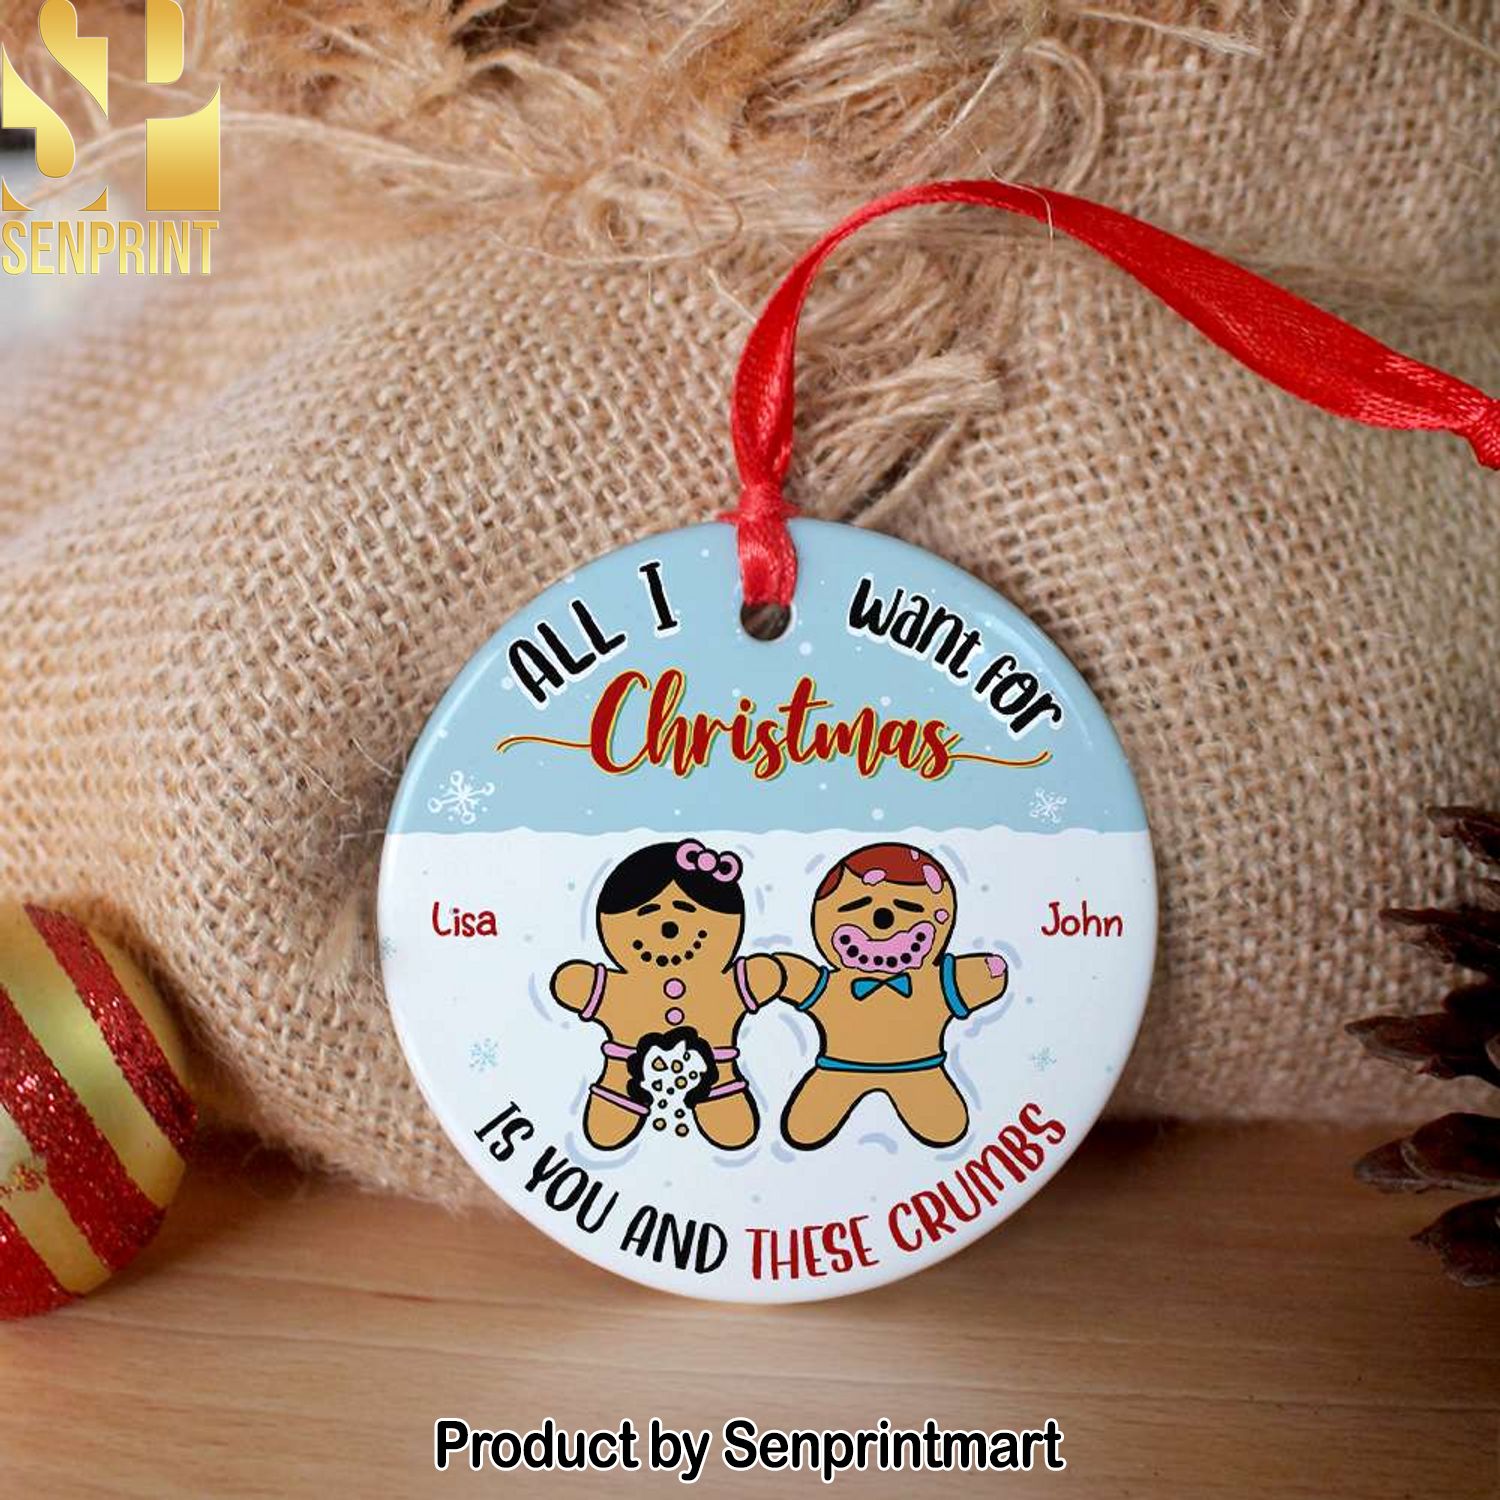 All I Want For Christmas Is You, Couple Gift, Personalized Ceramic Ornament, Naughty Gingerbread Cookie Ornament, Christmas Gift